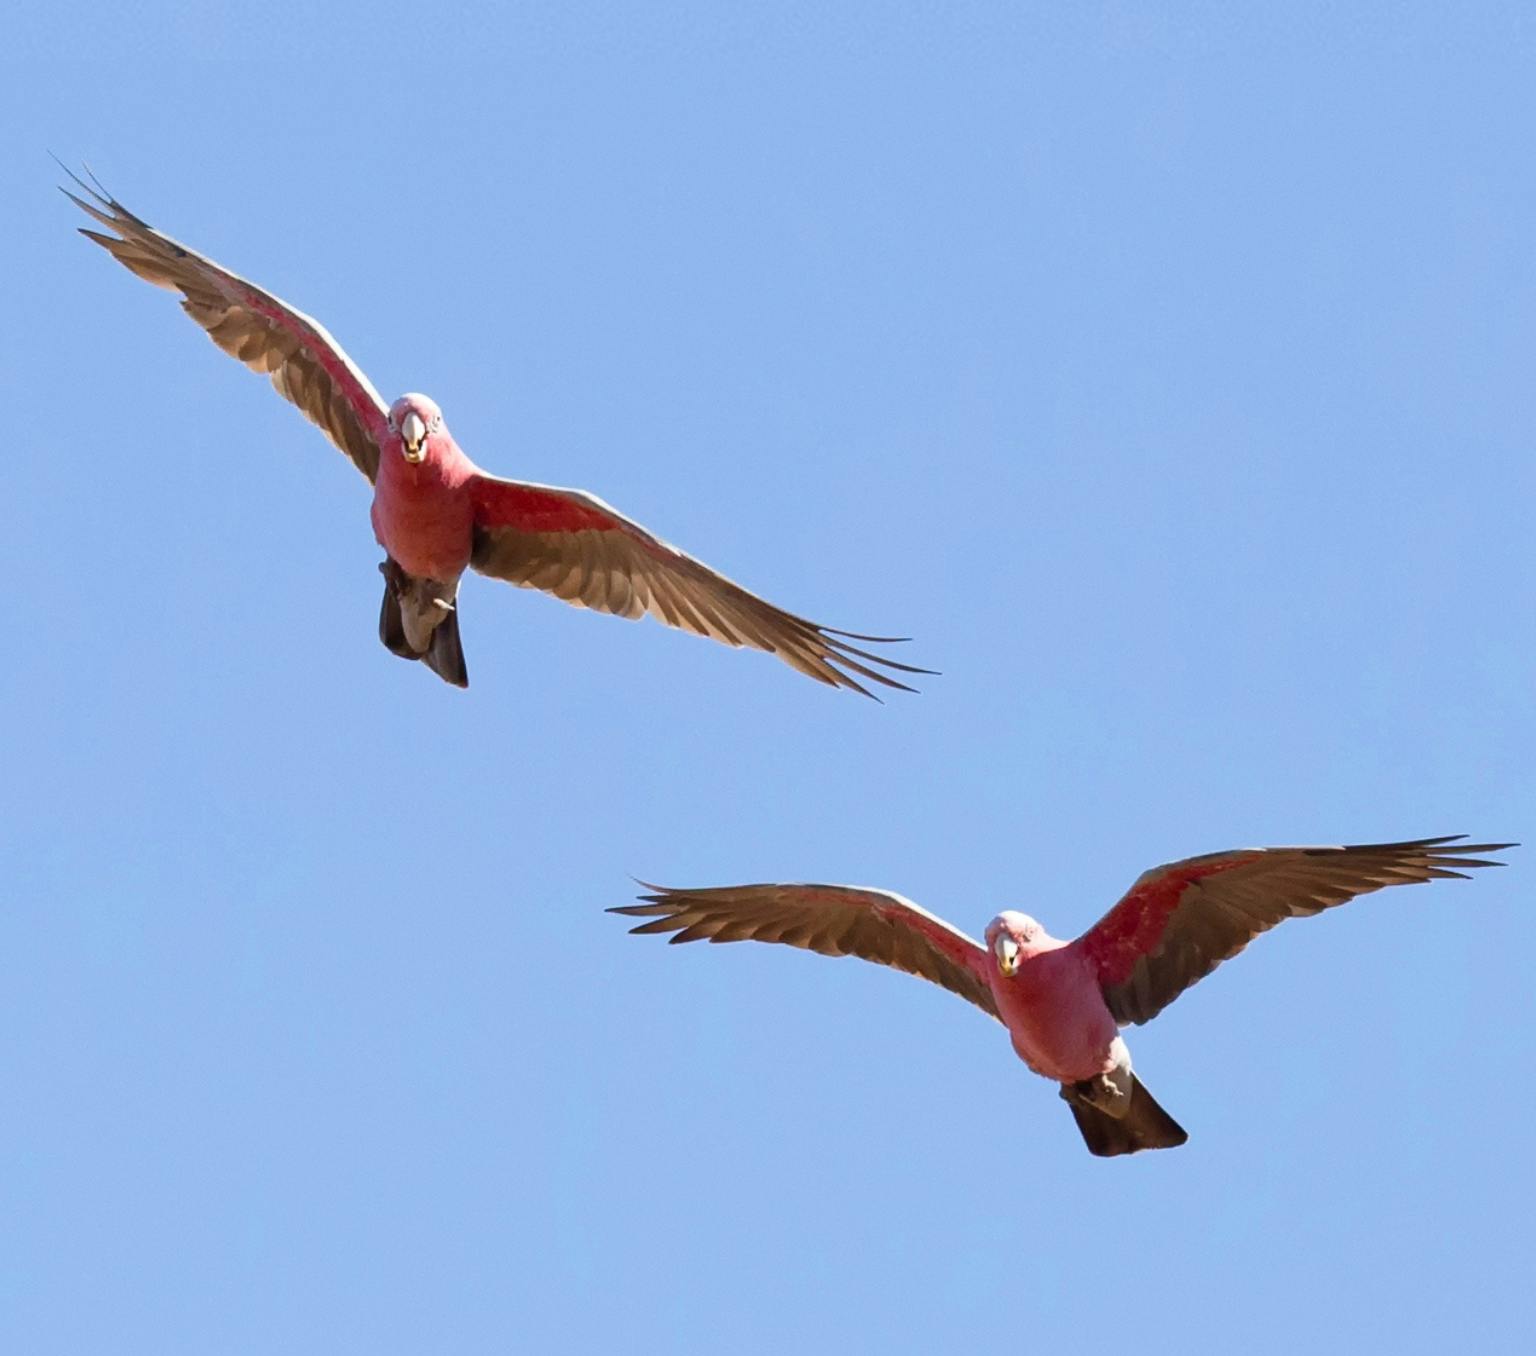 Two birds with pink feathered bellies and grey wings are flying in a blue sky